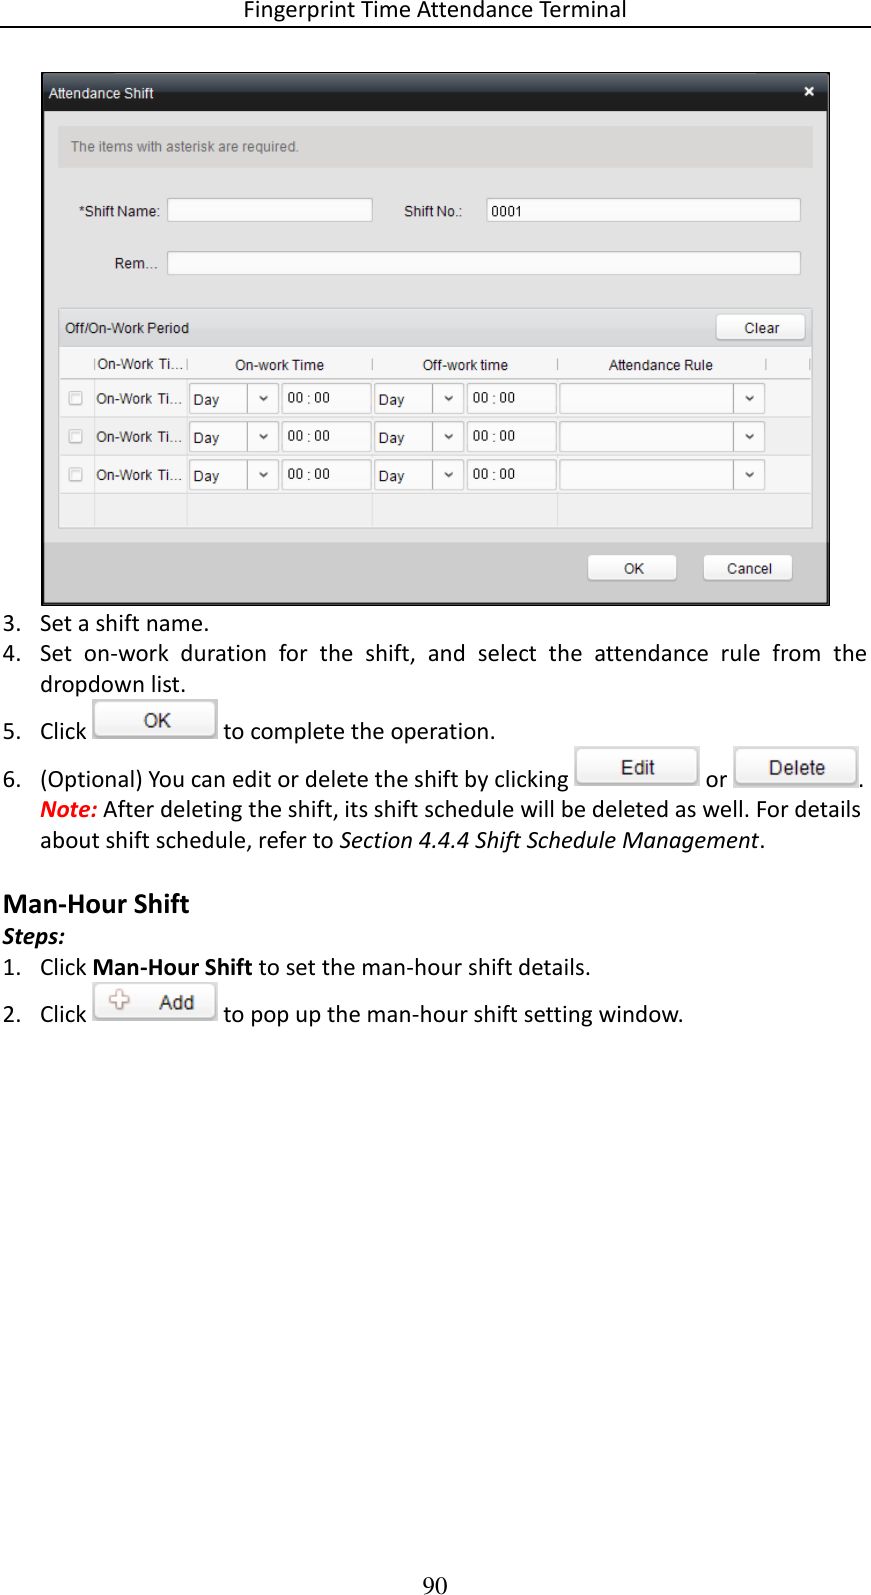 Fingerprint Time Attendance Terminal 90  3. Set a shift name.  4. Set  on-work  duration  for  the  shift,  and  select  the  attendance  rule  from  the dropdown list.  5. Click   to complete the operation. 6. (Optional) You can edit or delete the shift by clicking   or  .  Note: After deleting the shift, its shift schedule will be deleted as well. For details about shift schedule, refer to Section 4.4.4 Shift Schedule Management.  Man-Hour Shift Steps: 1. Click Man-Hour Shift to set the man-hour shift details. 2. Click   to pop up the man-hour shift setting window.  